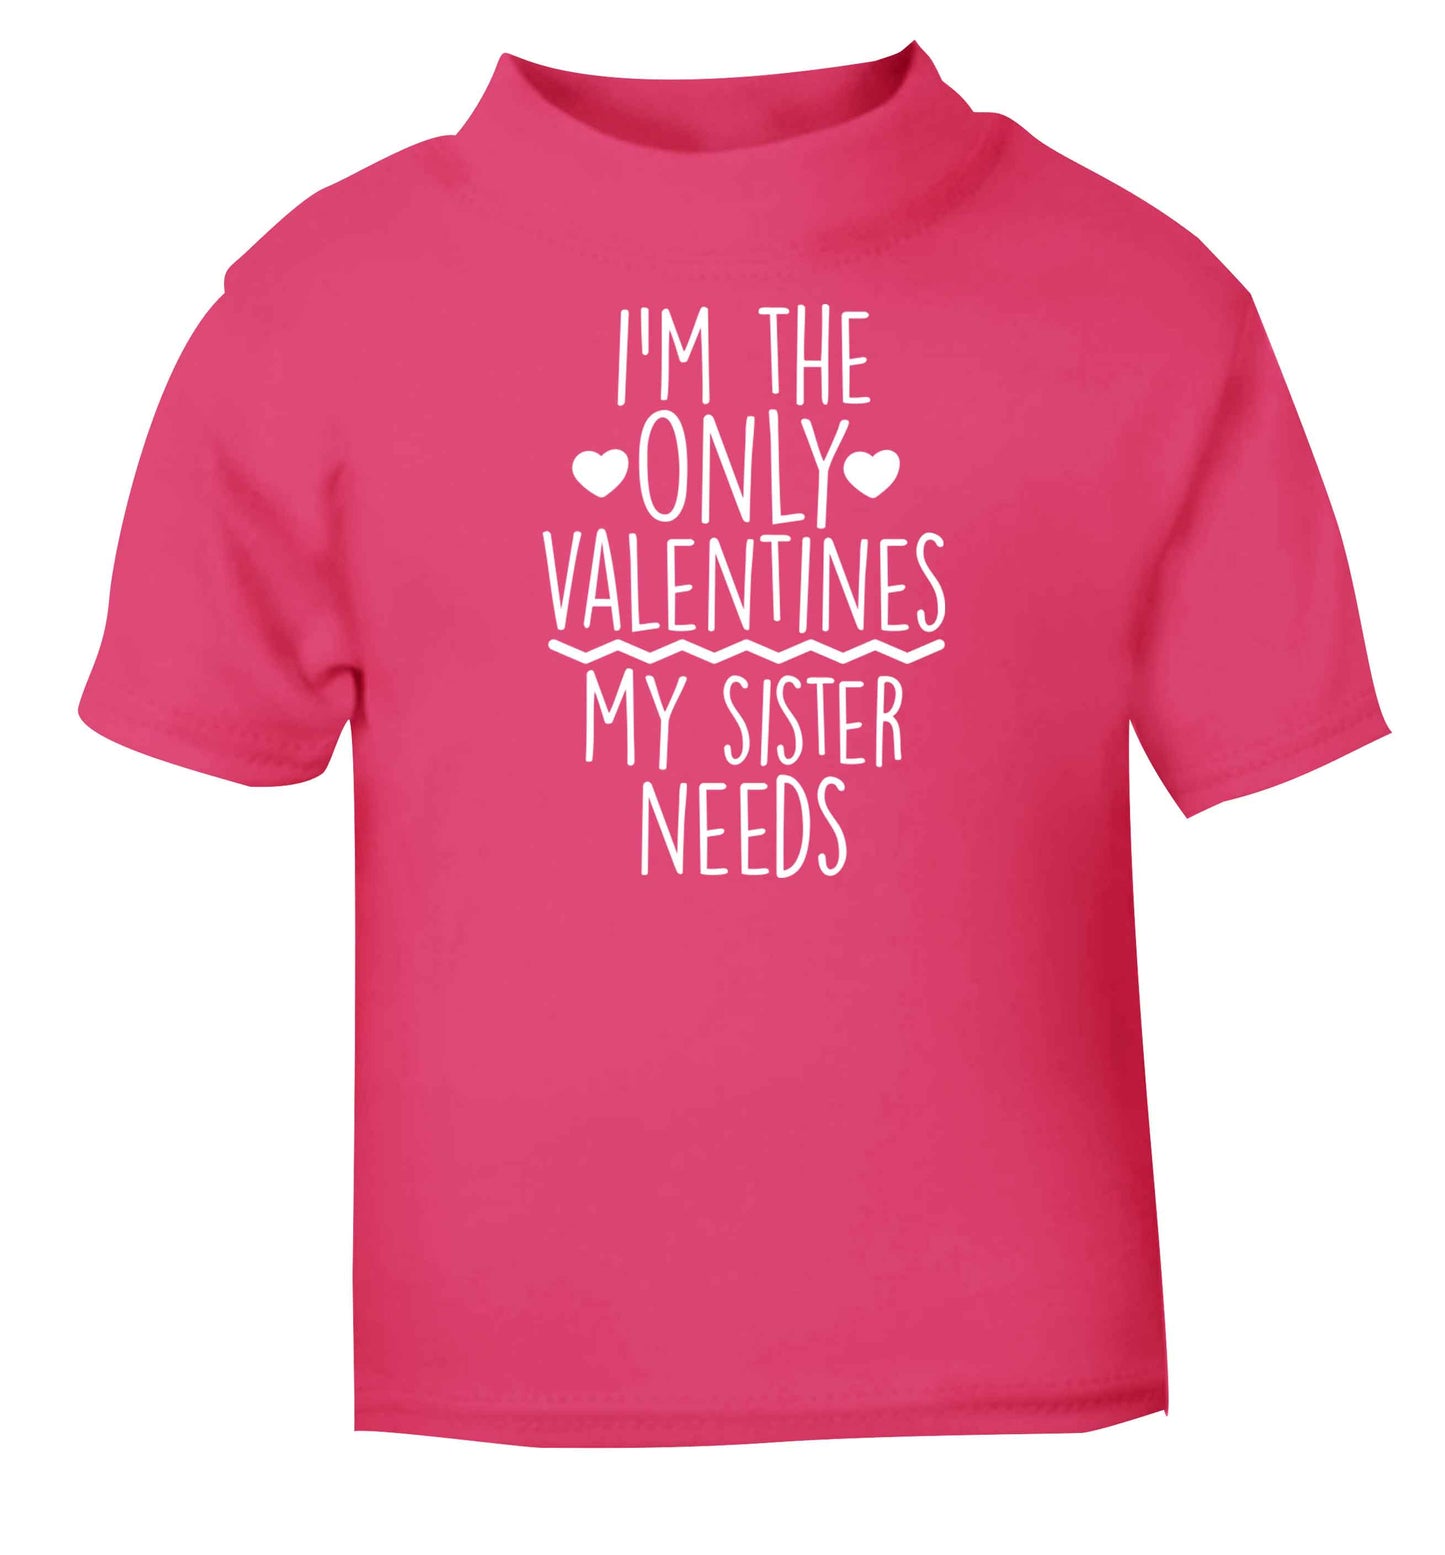 I'm the only valentines my sister needs pink baby toddler Tshirt 2 Years